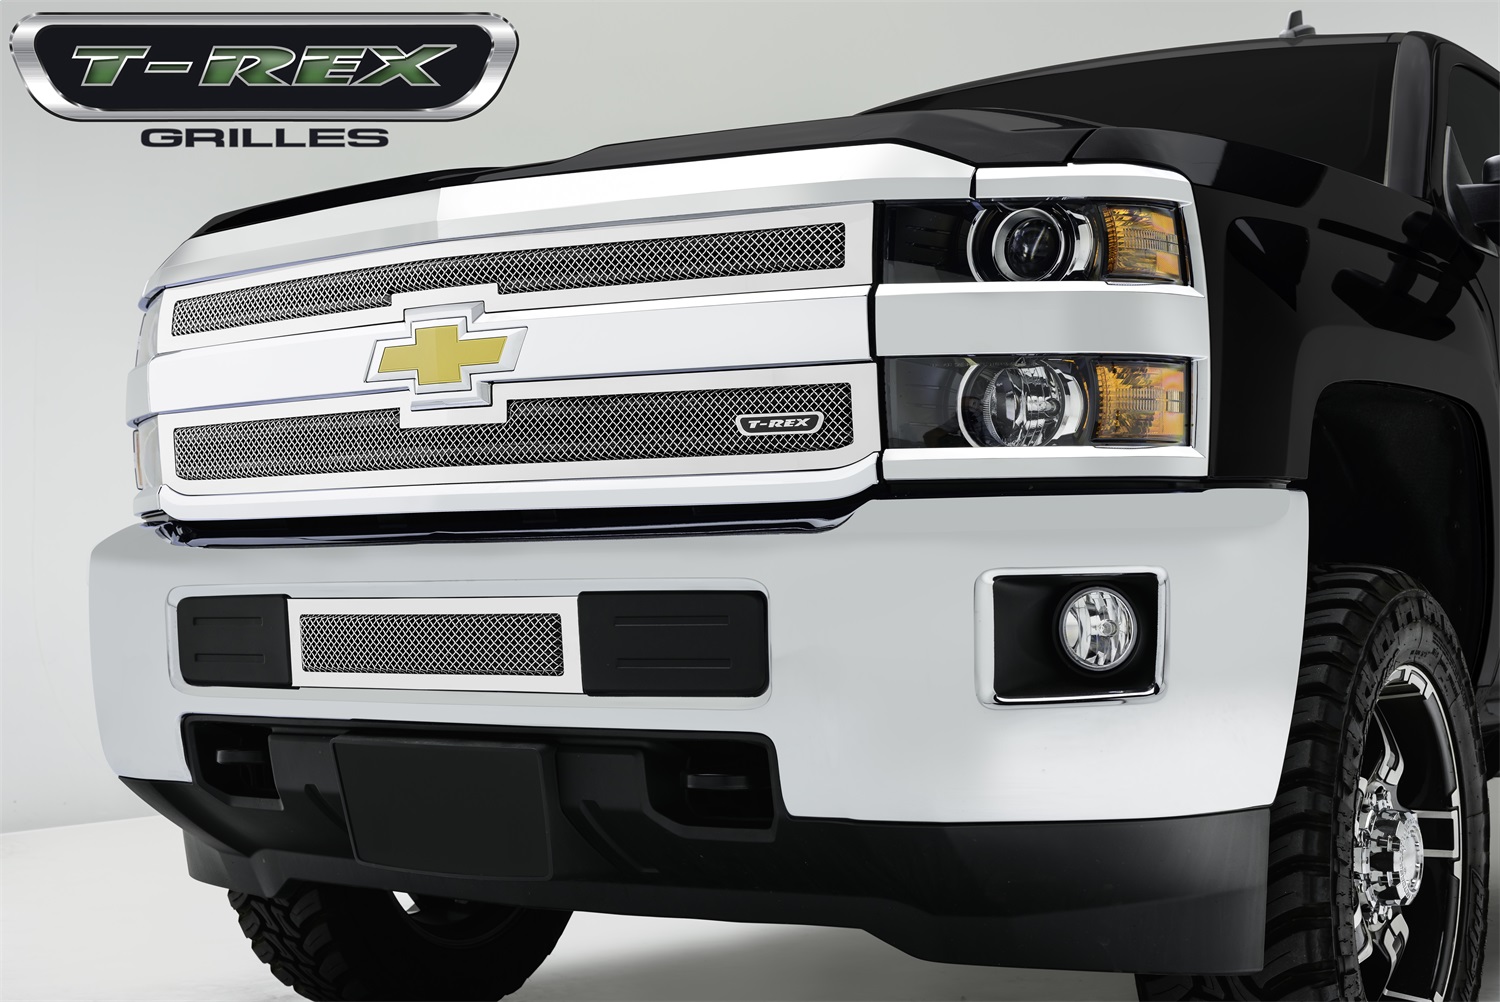 UPC 609579025027 product image for Grilles 55122 Upper Class Series  Mesh Bumper Grille Overlay  Polished Stainless | upcitemdb.com